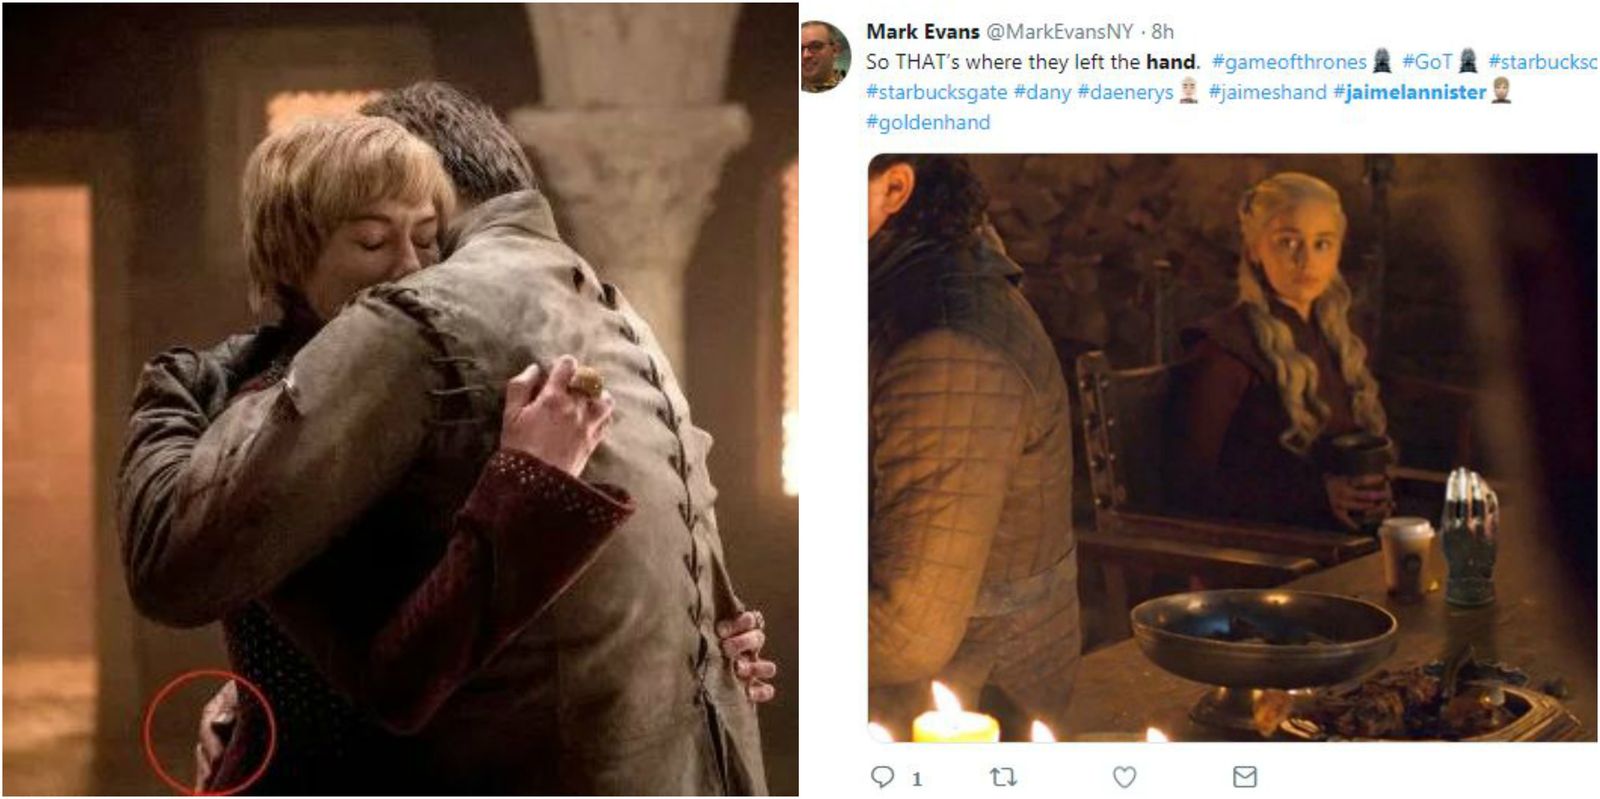 Game Of Thrones: Jaime Lannister Grew His Hand Back Before His Death And Twitter Memes Are Merciless